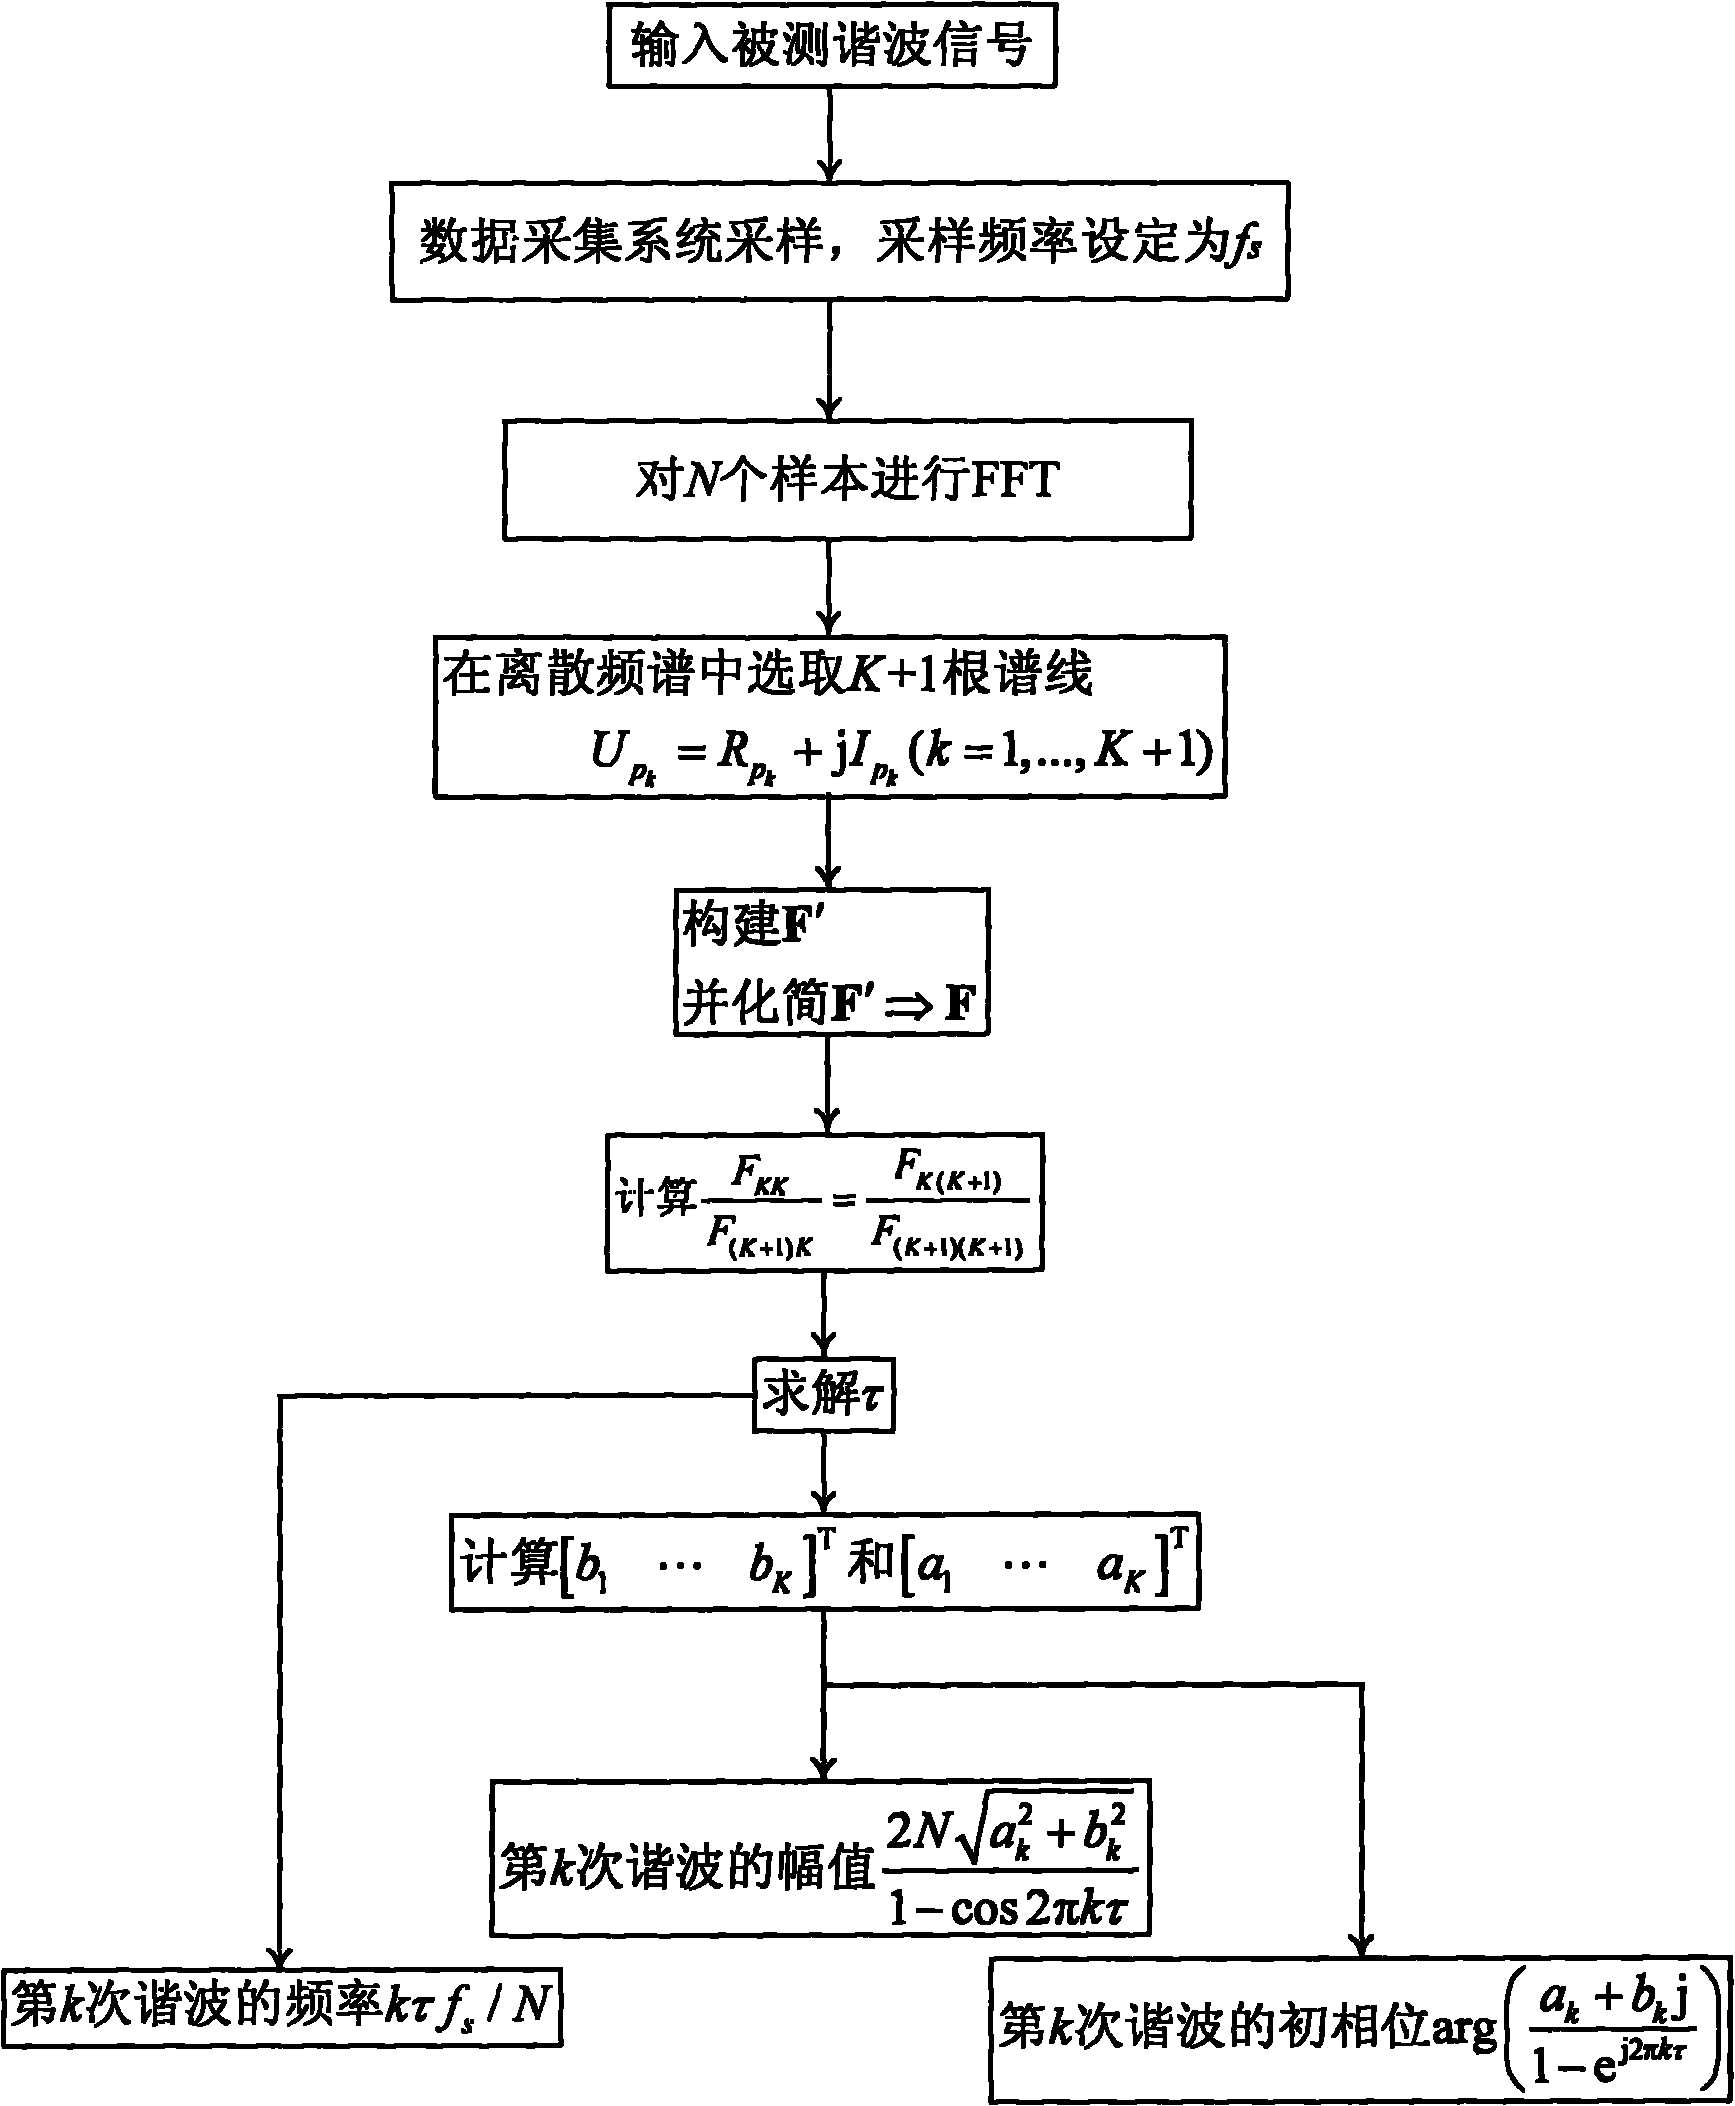 High-accuracy non-integer-period sampled harmonic analysis and measurement method